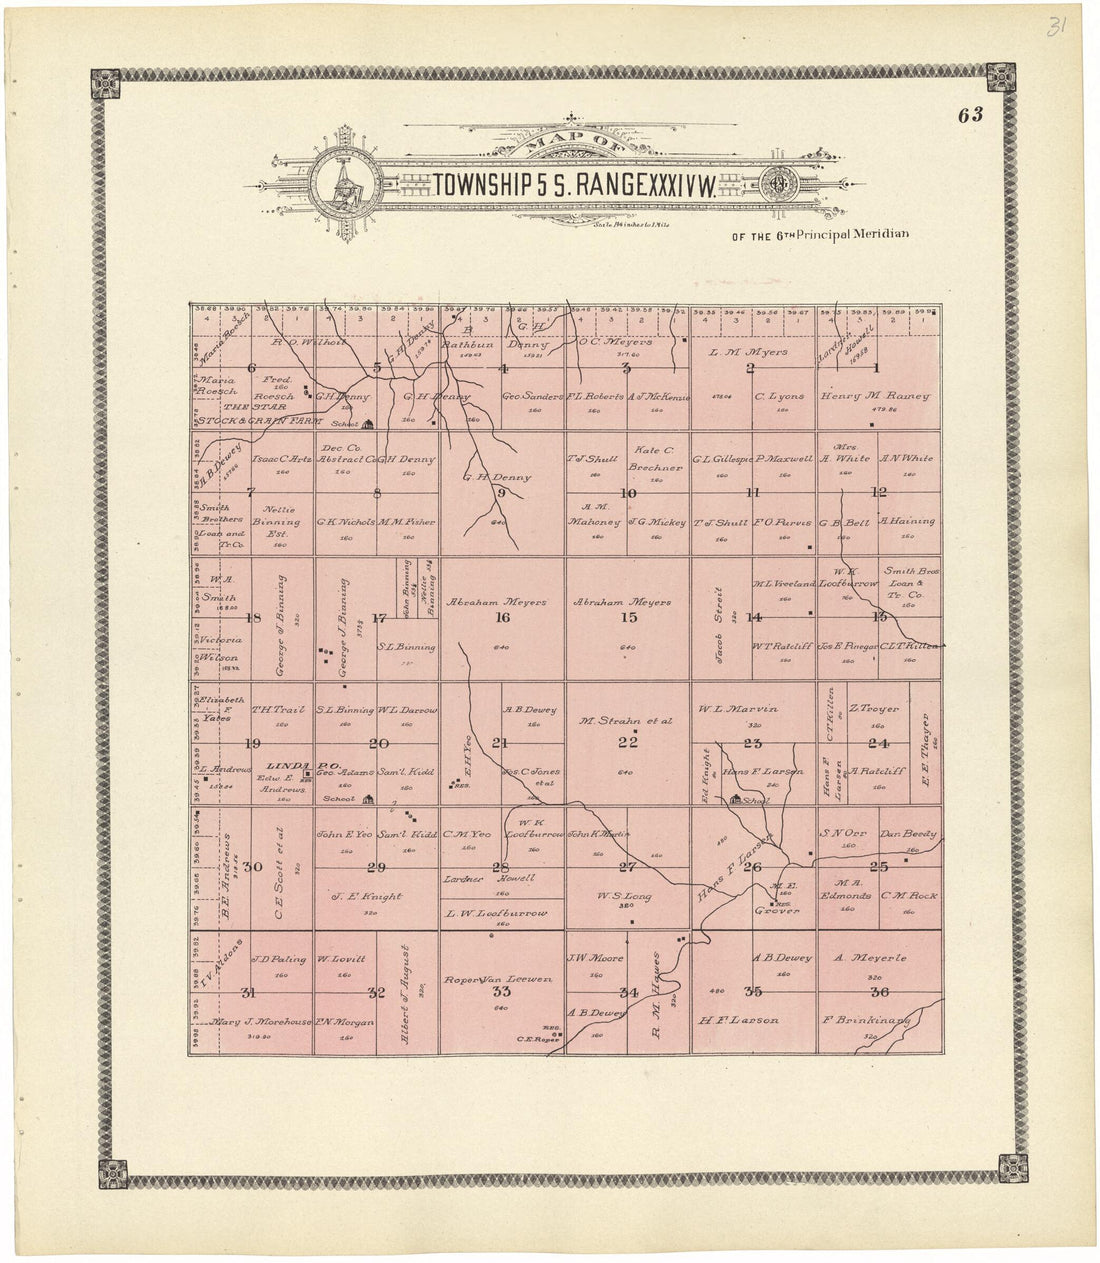 This old map of Map of Township 5 S. Range XXXIV W. from Standard Atlas of Rawlins County, Kansas from 1906 was created by  Geo. A. Ogle &amp; Co in 1906